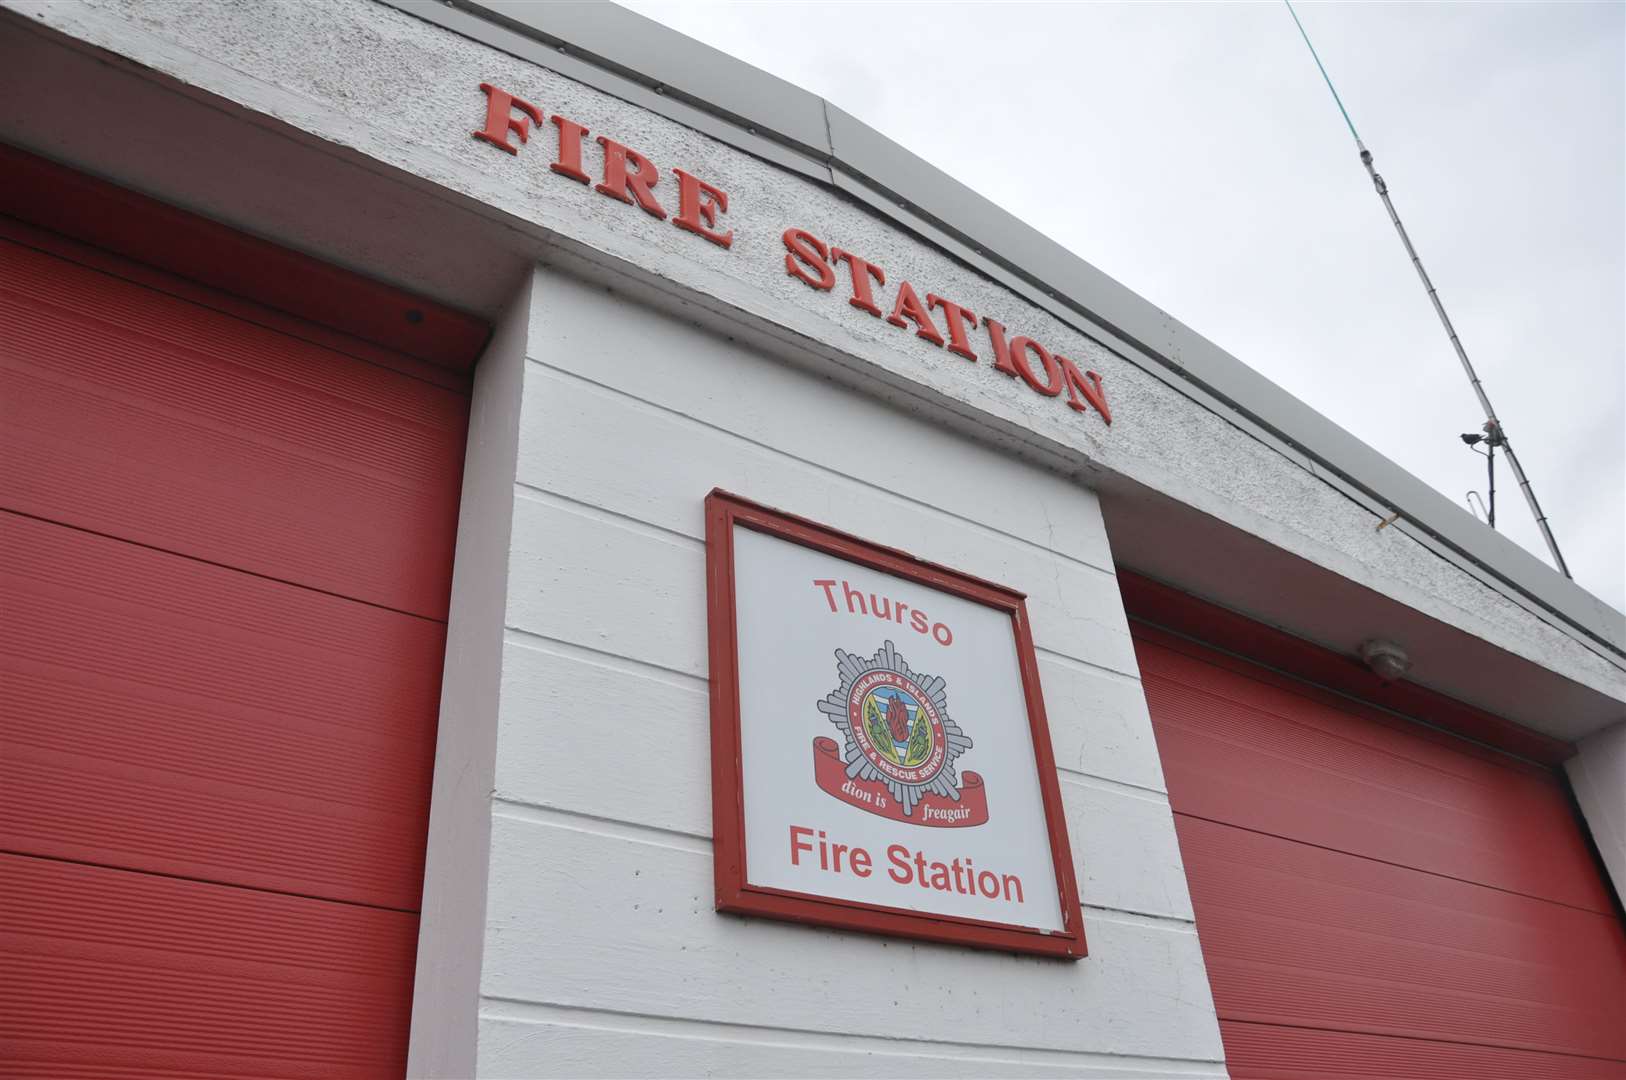 Thurso fire station will continue to act as a Covid testing centre after a successful trial scheme.